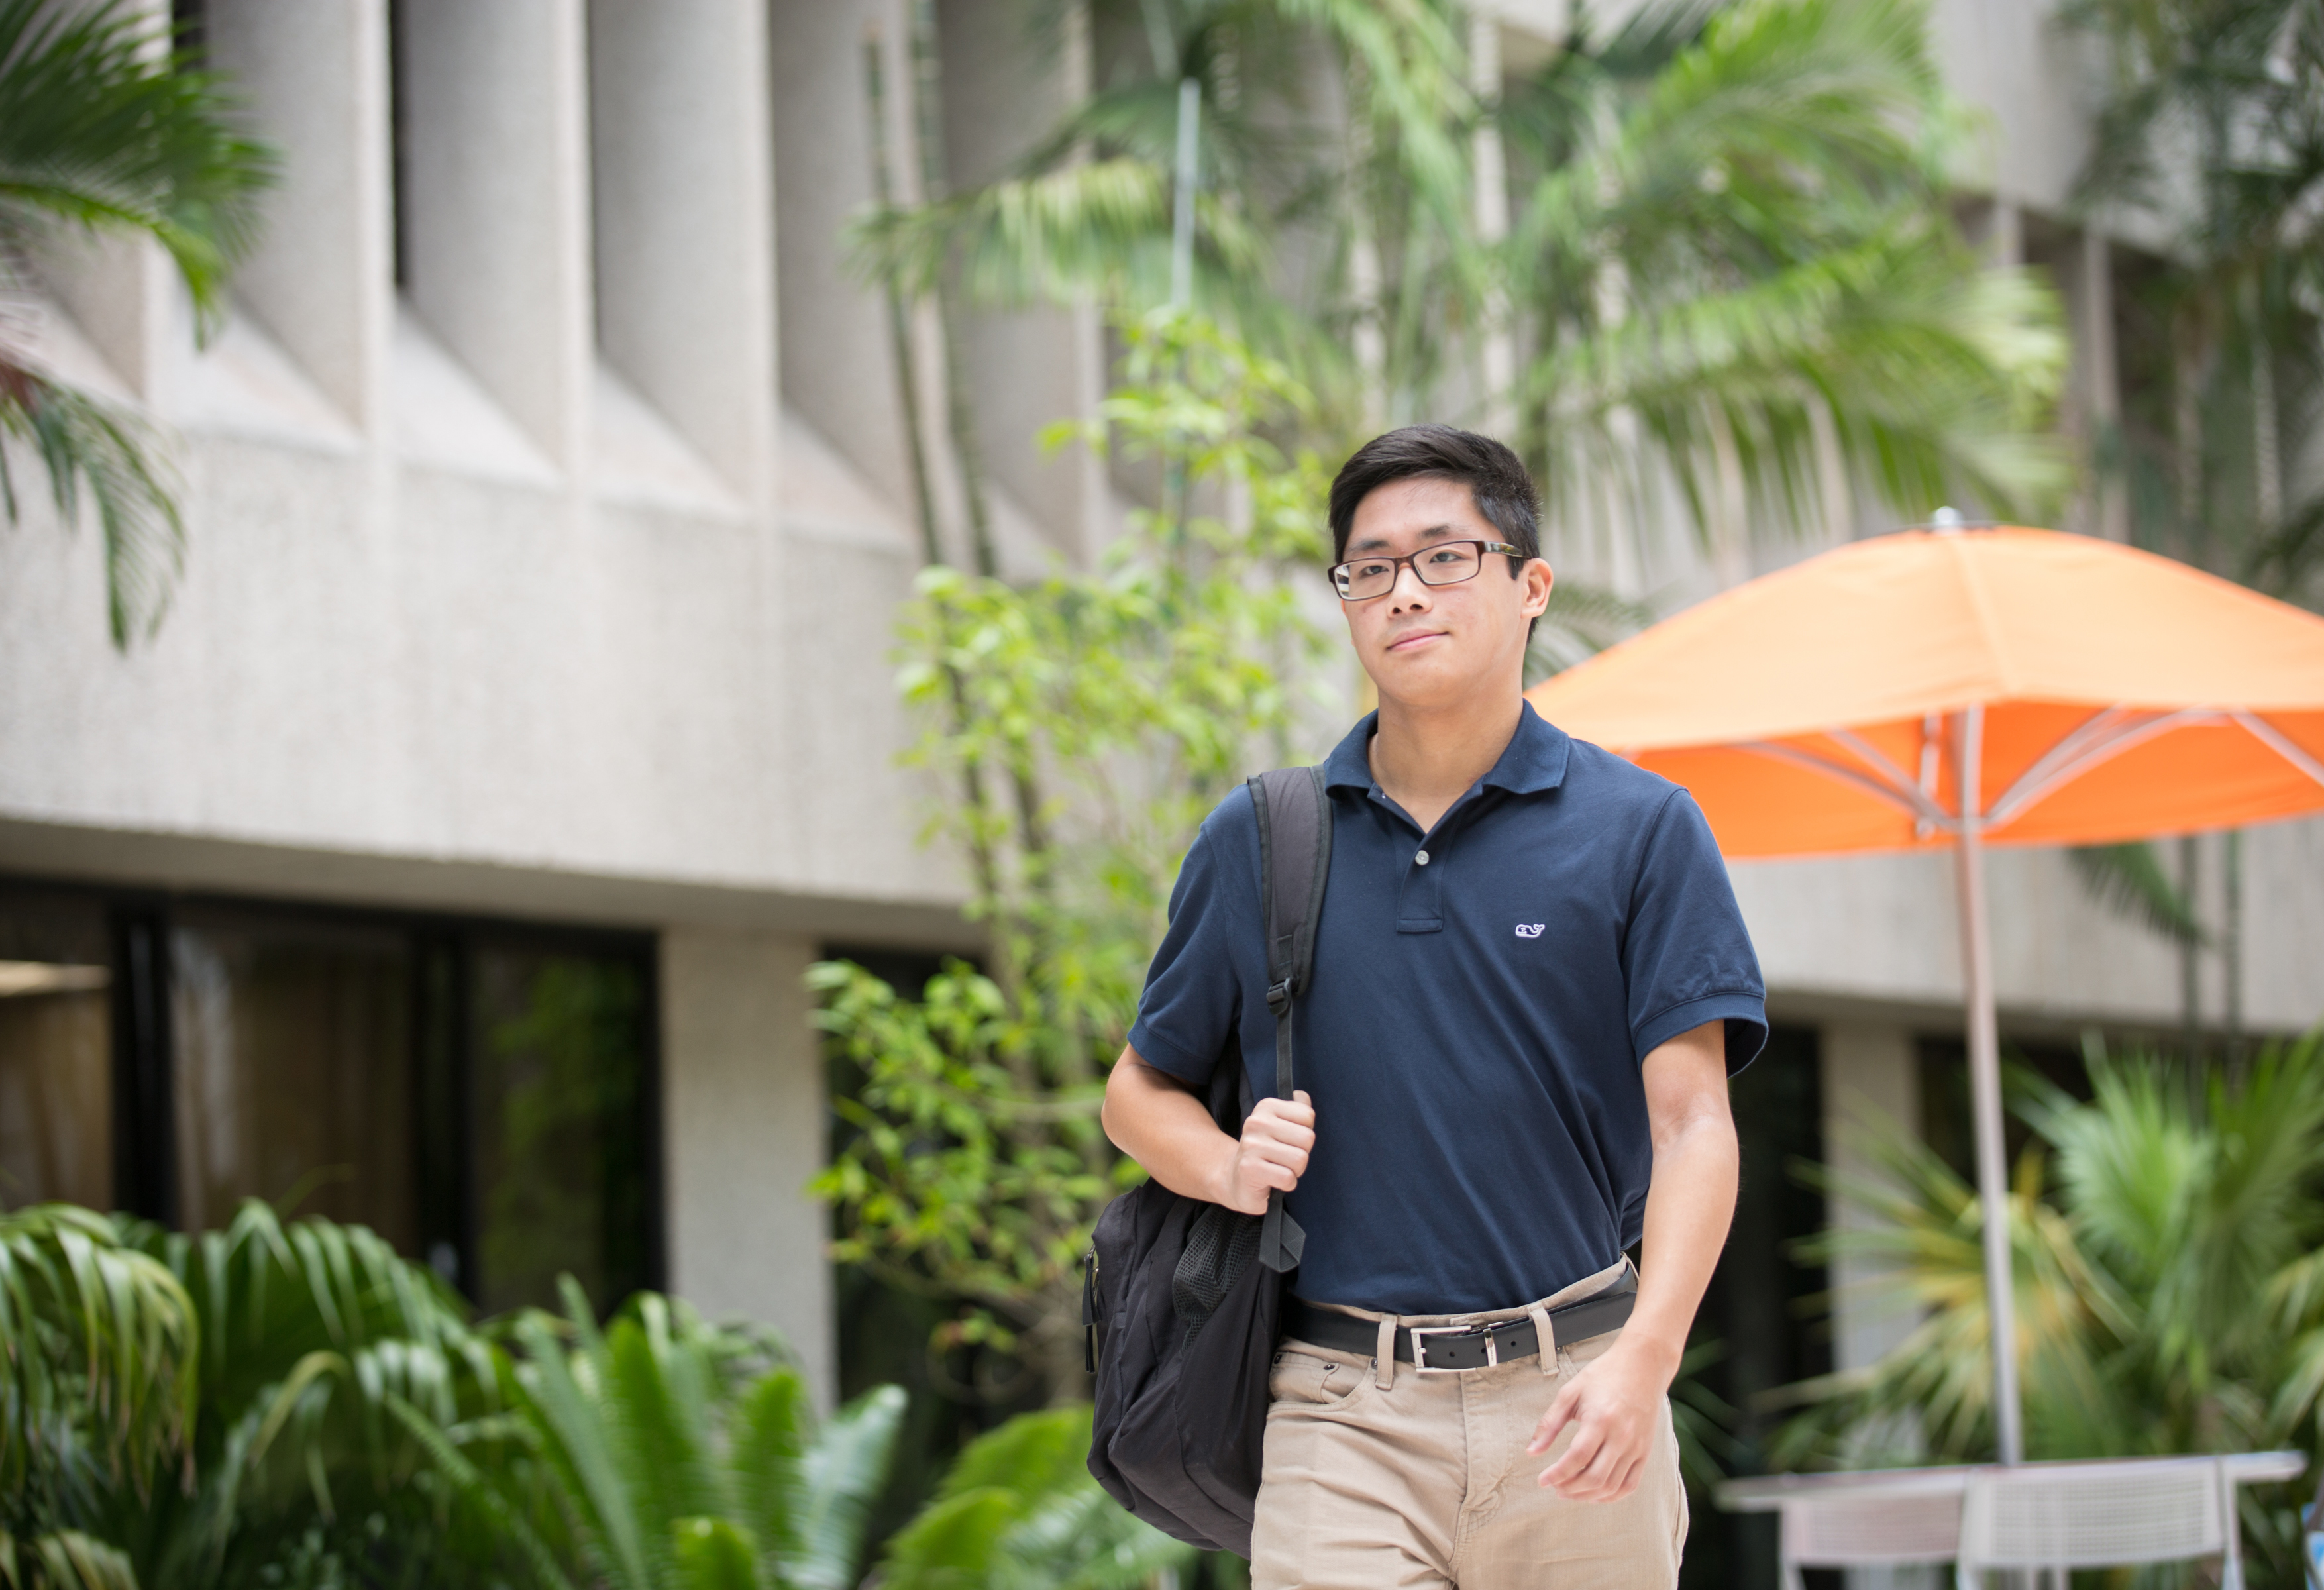 Male student walking through campus, orange umbrellas and trees in the background.